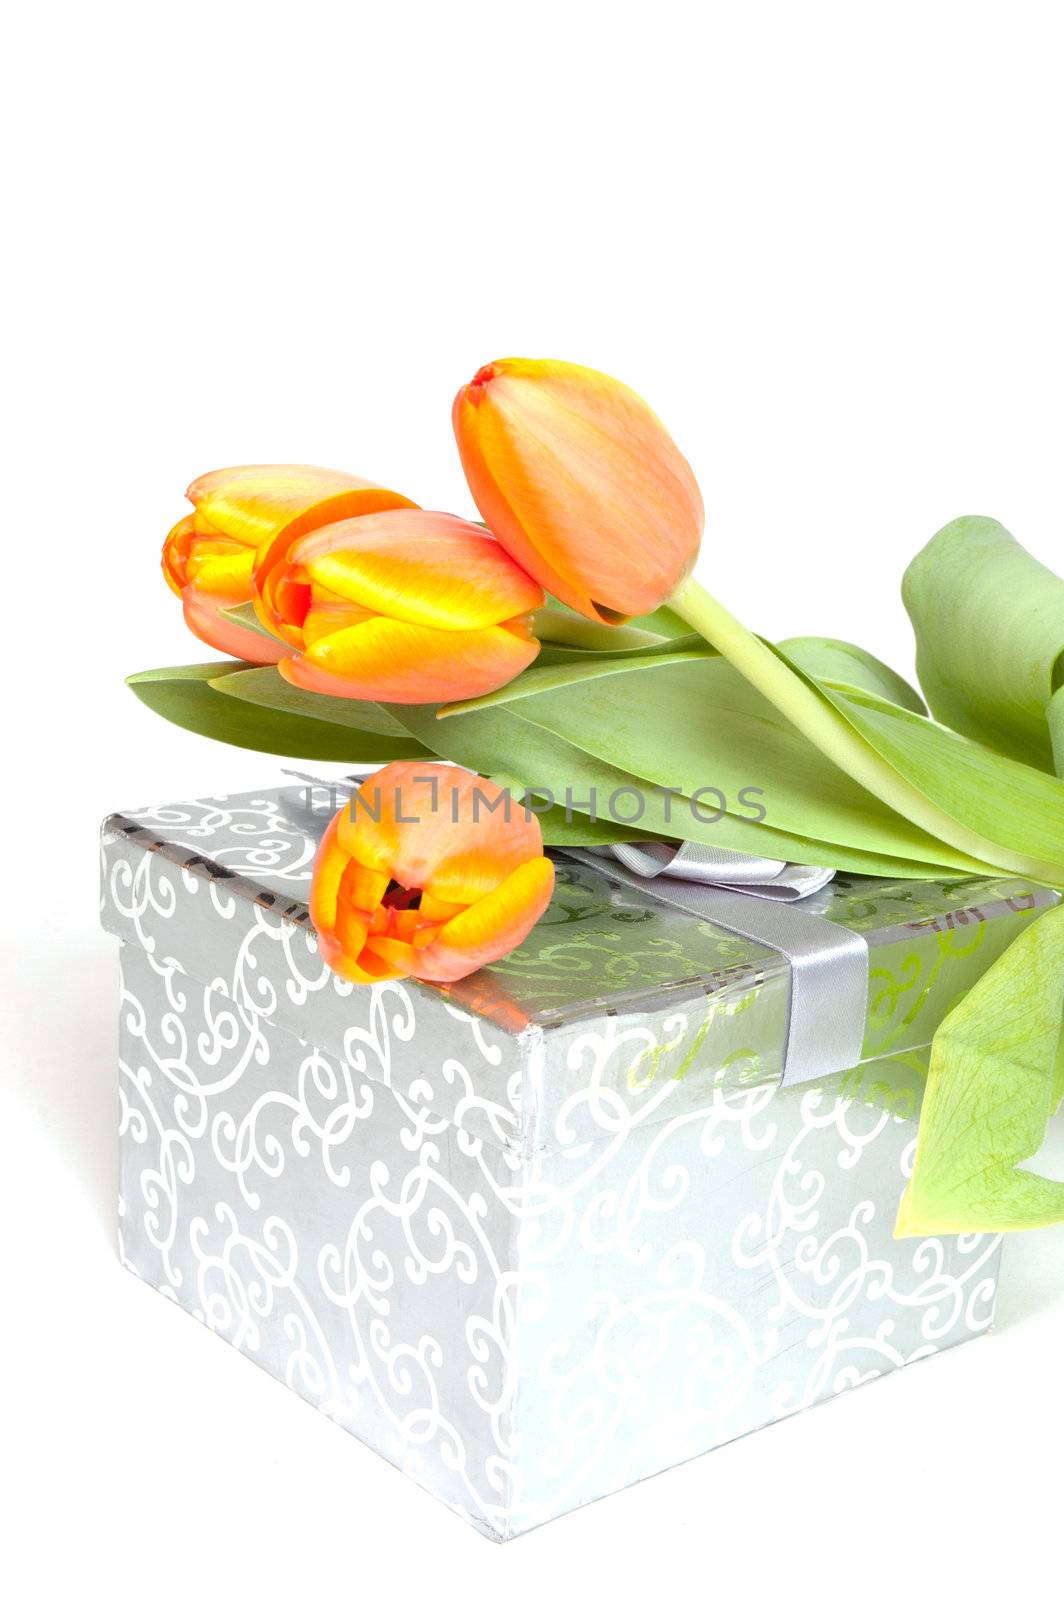 yellow orange tulips laying on a silver present